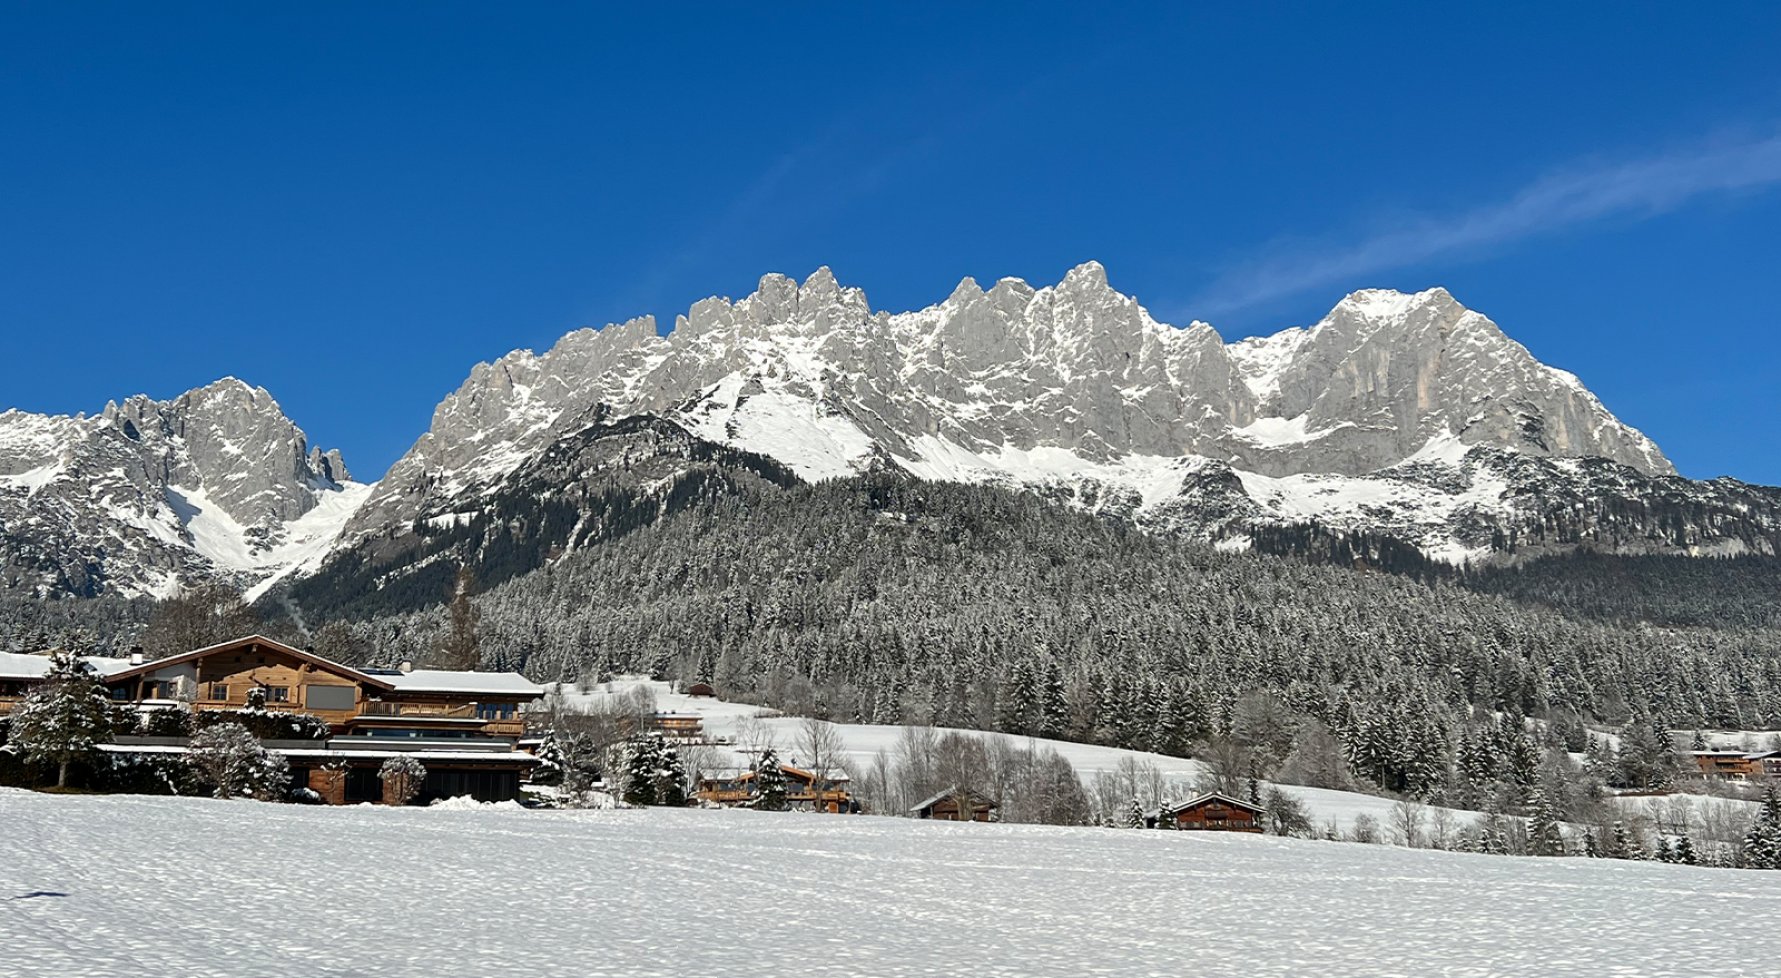 Property in 6353 Going am Wilden Kaiser: IMPERIAL RESIDENCE – Rural villa with panoramic views near Stanglwirt - picture 1